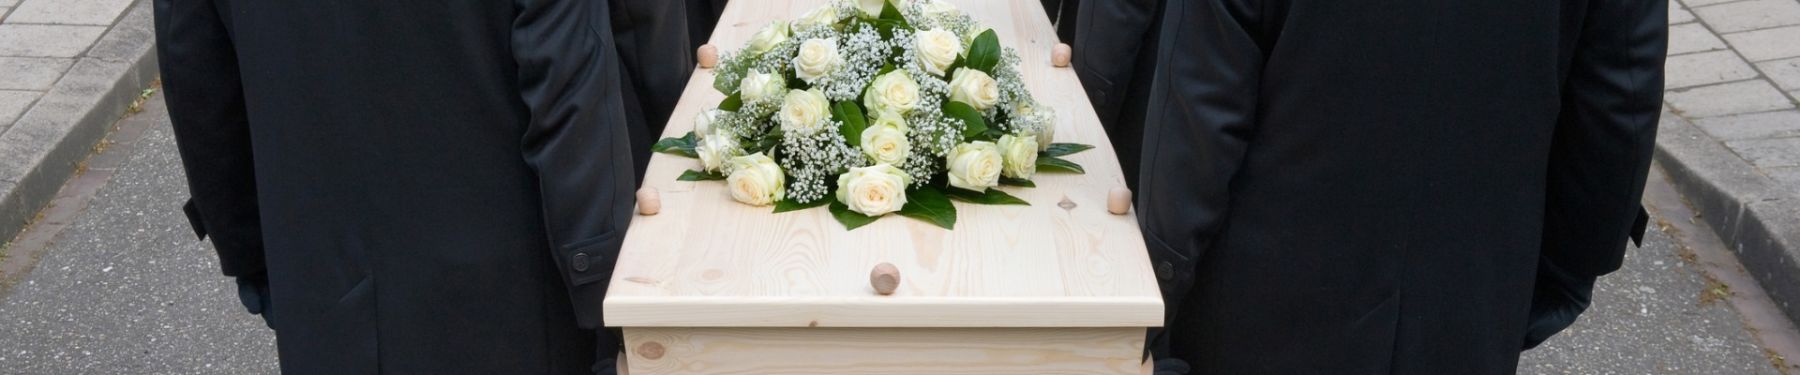 Shine Lawyers | Who has the final say when making funeral arrangements?